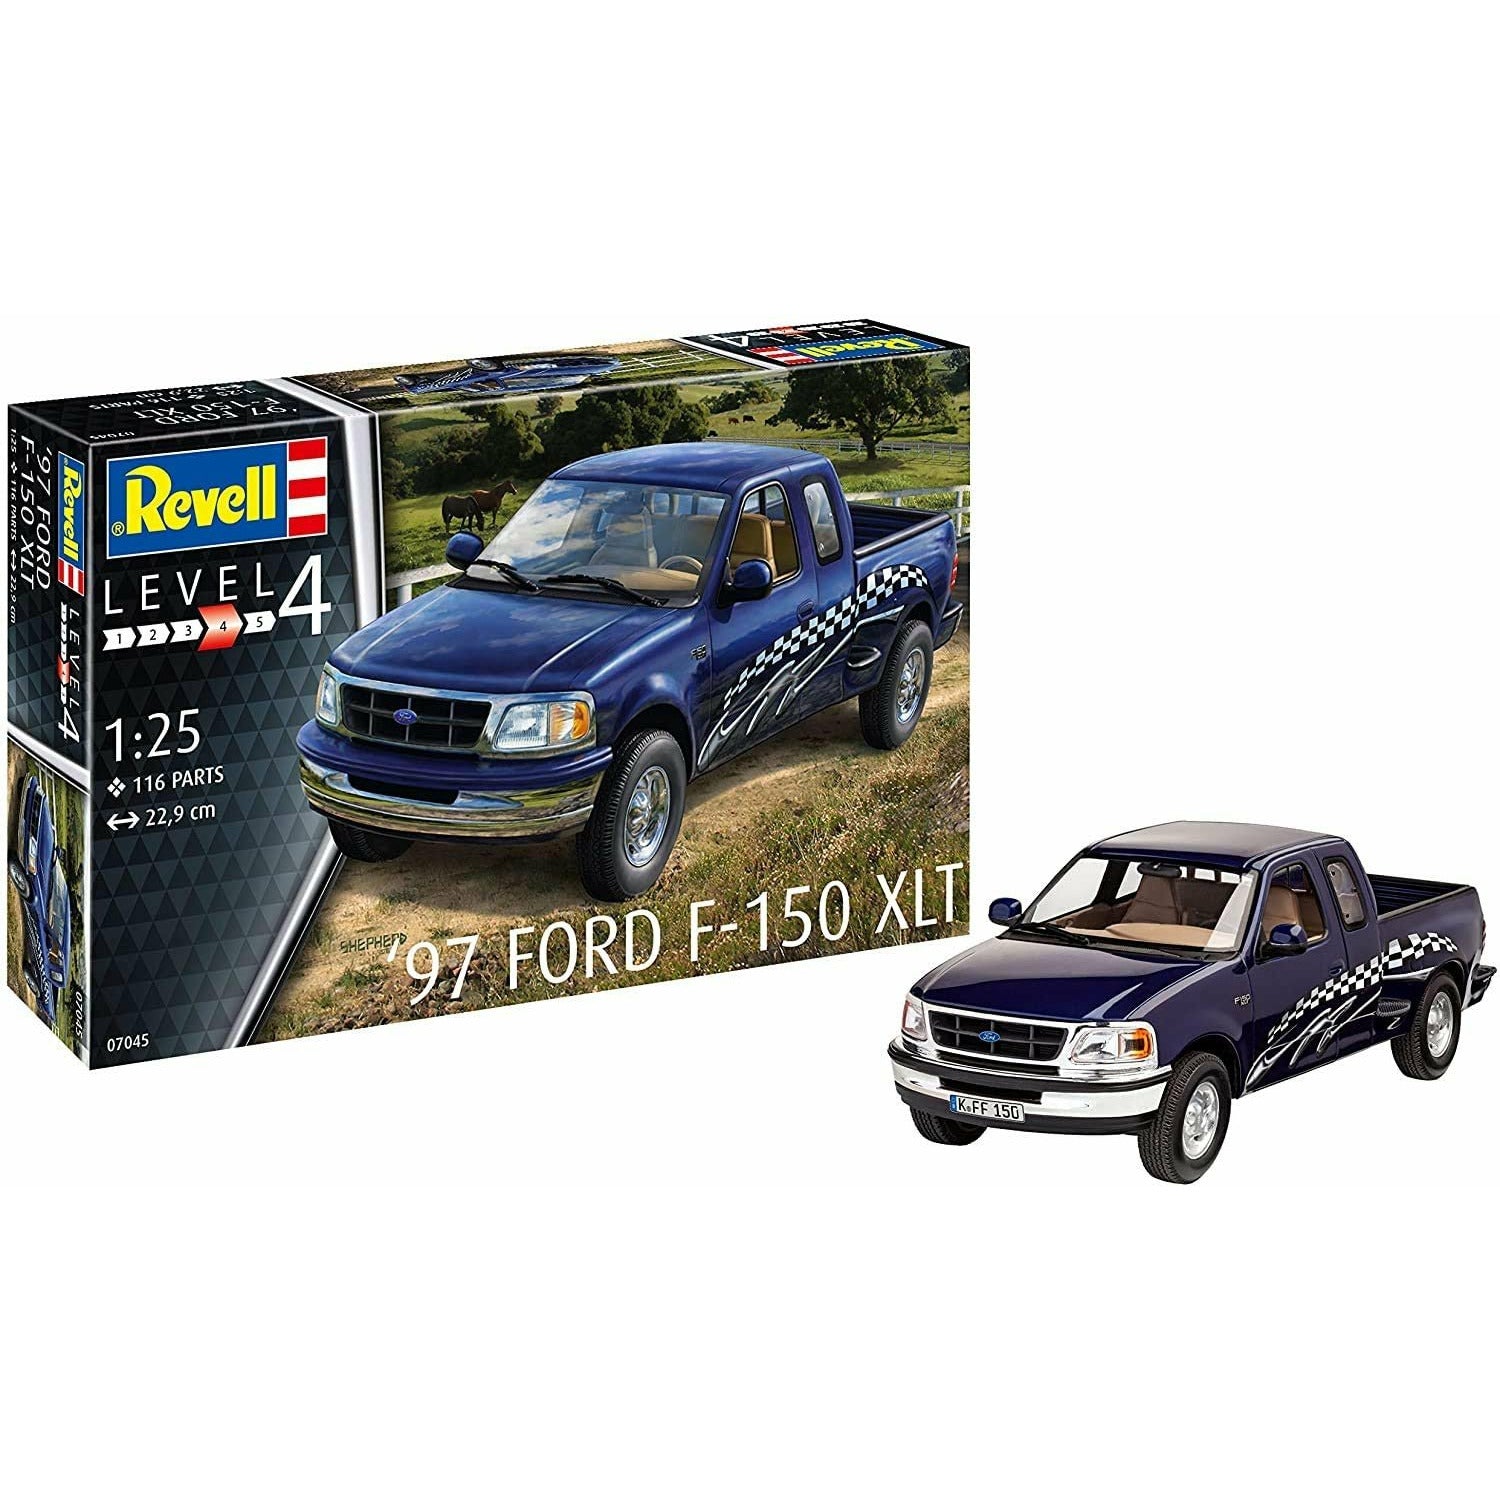 1997 Ford F-150 XLT 1/25 #07045 by Revell